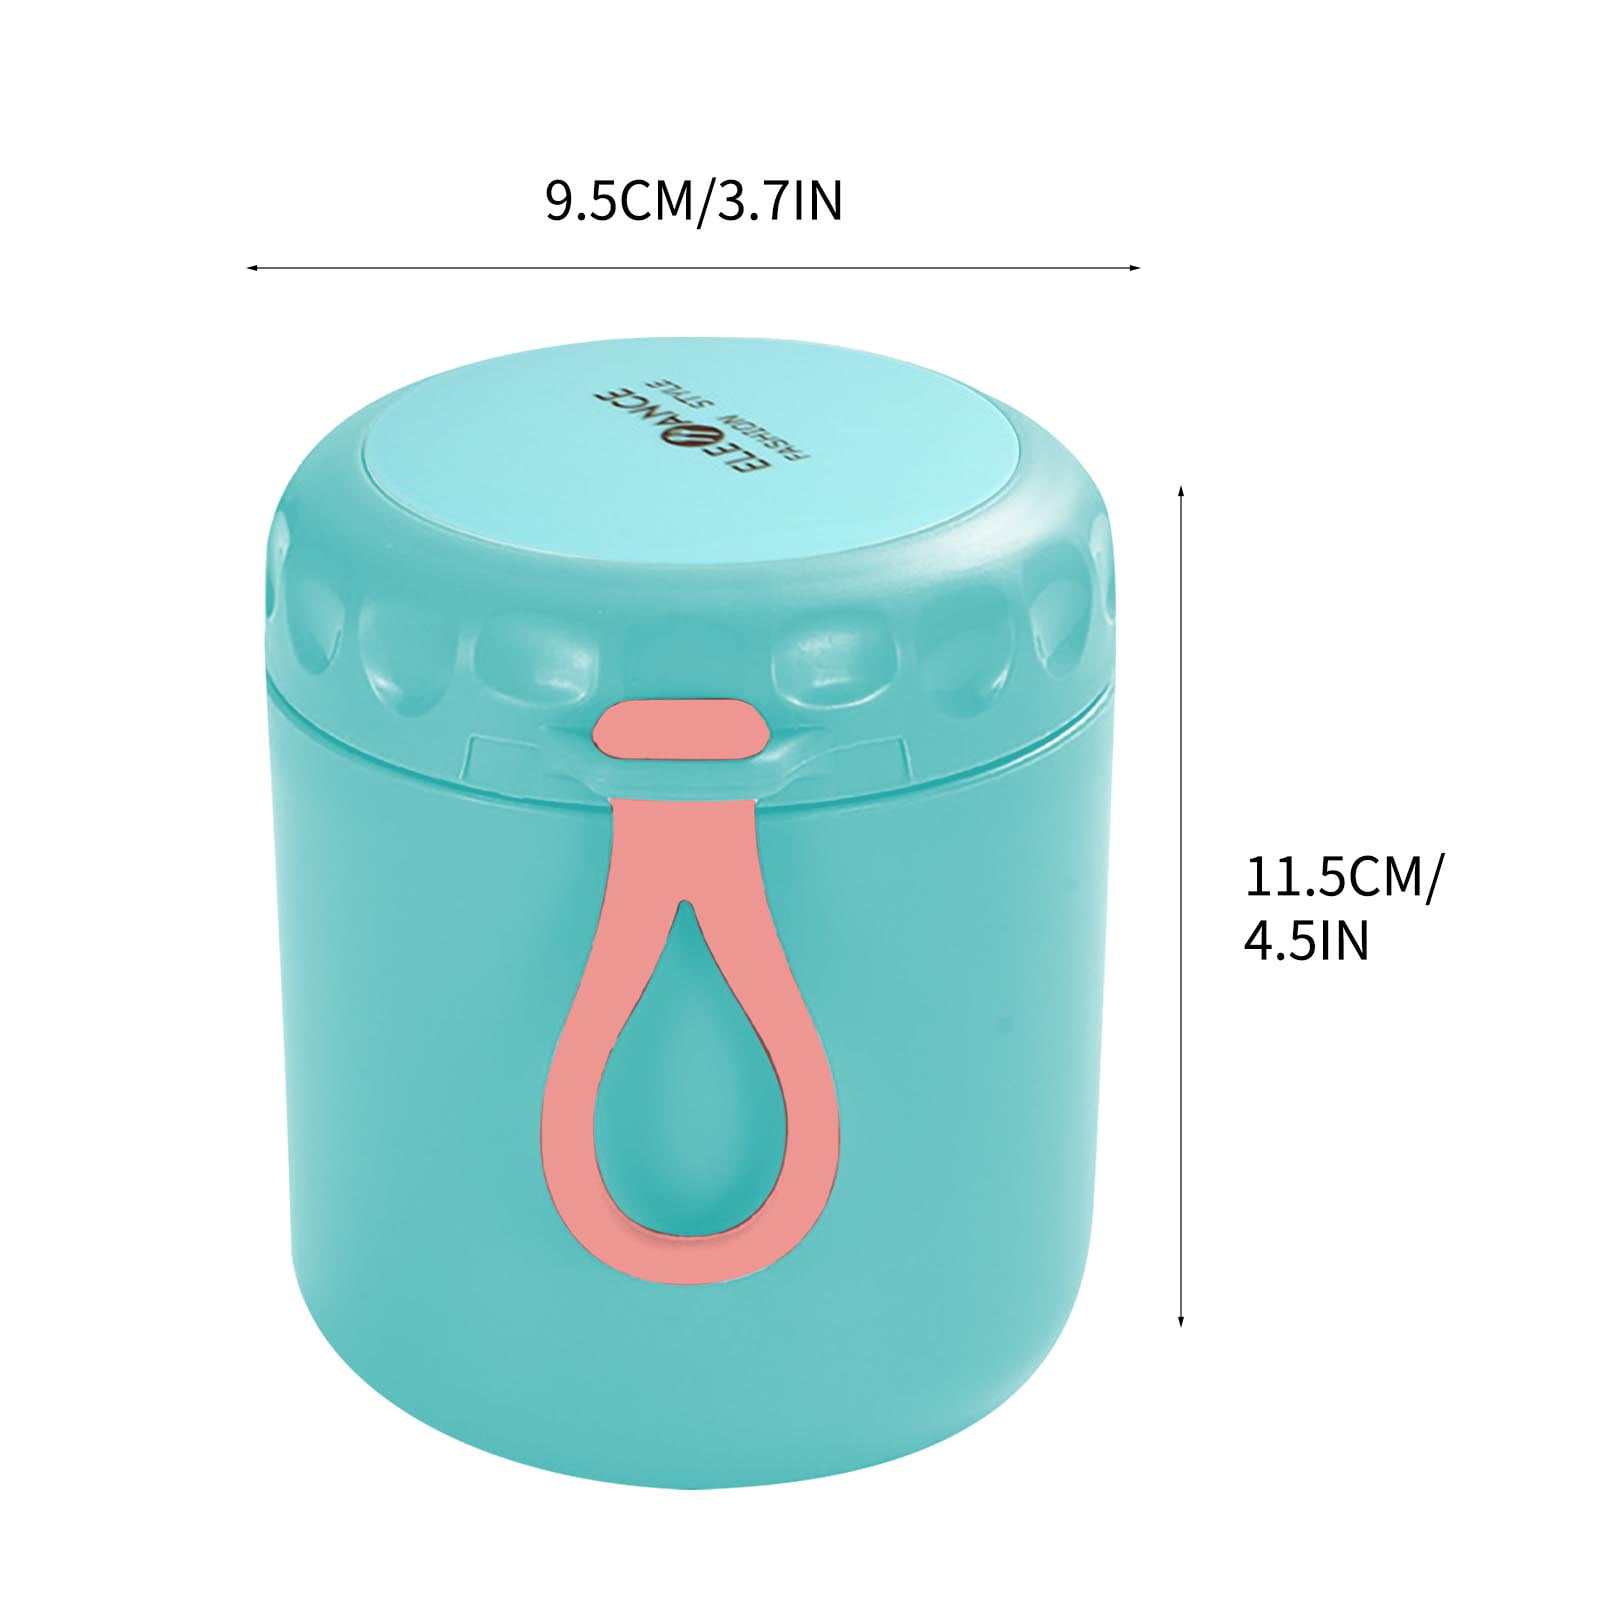 1Pcs Portable Vacuum Thermal Soup Cup Reusable Food Warmer Lunch